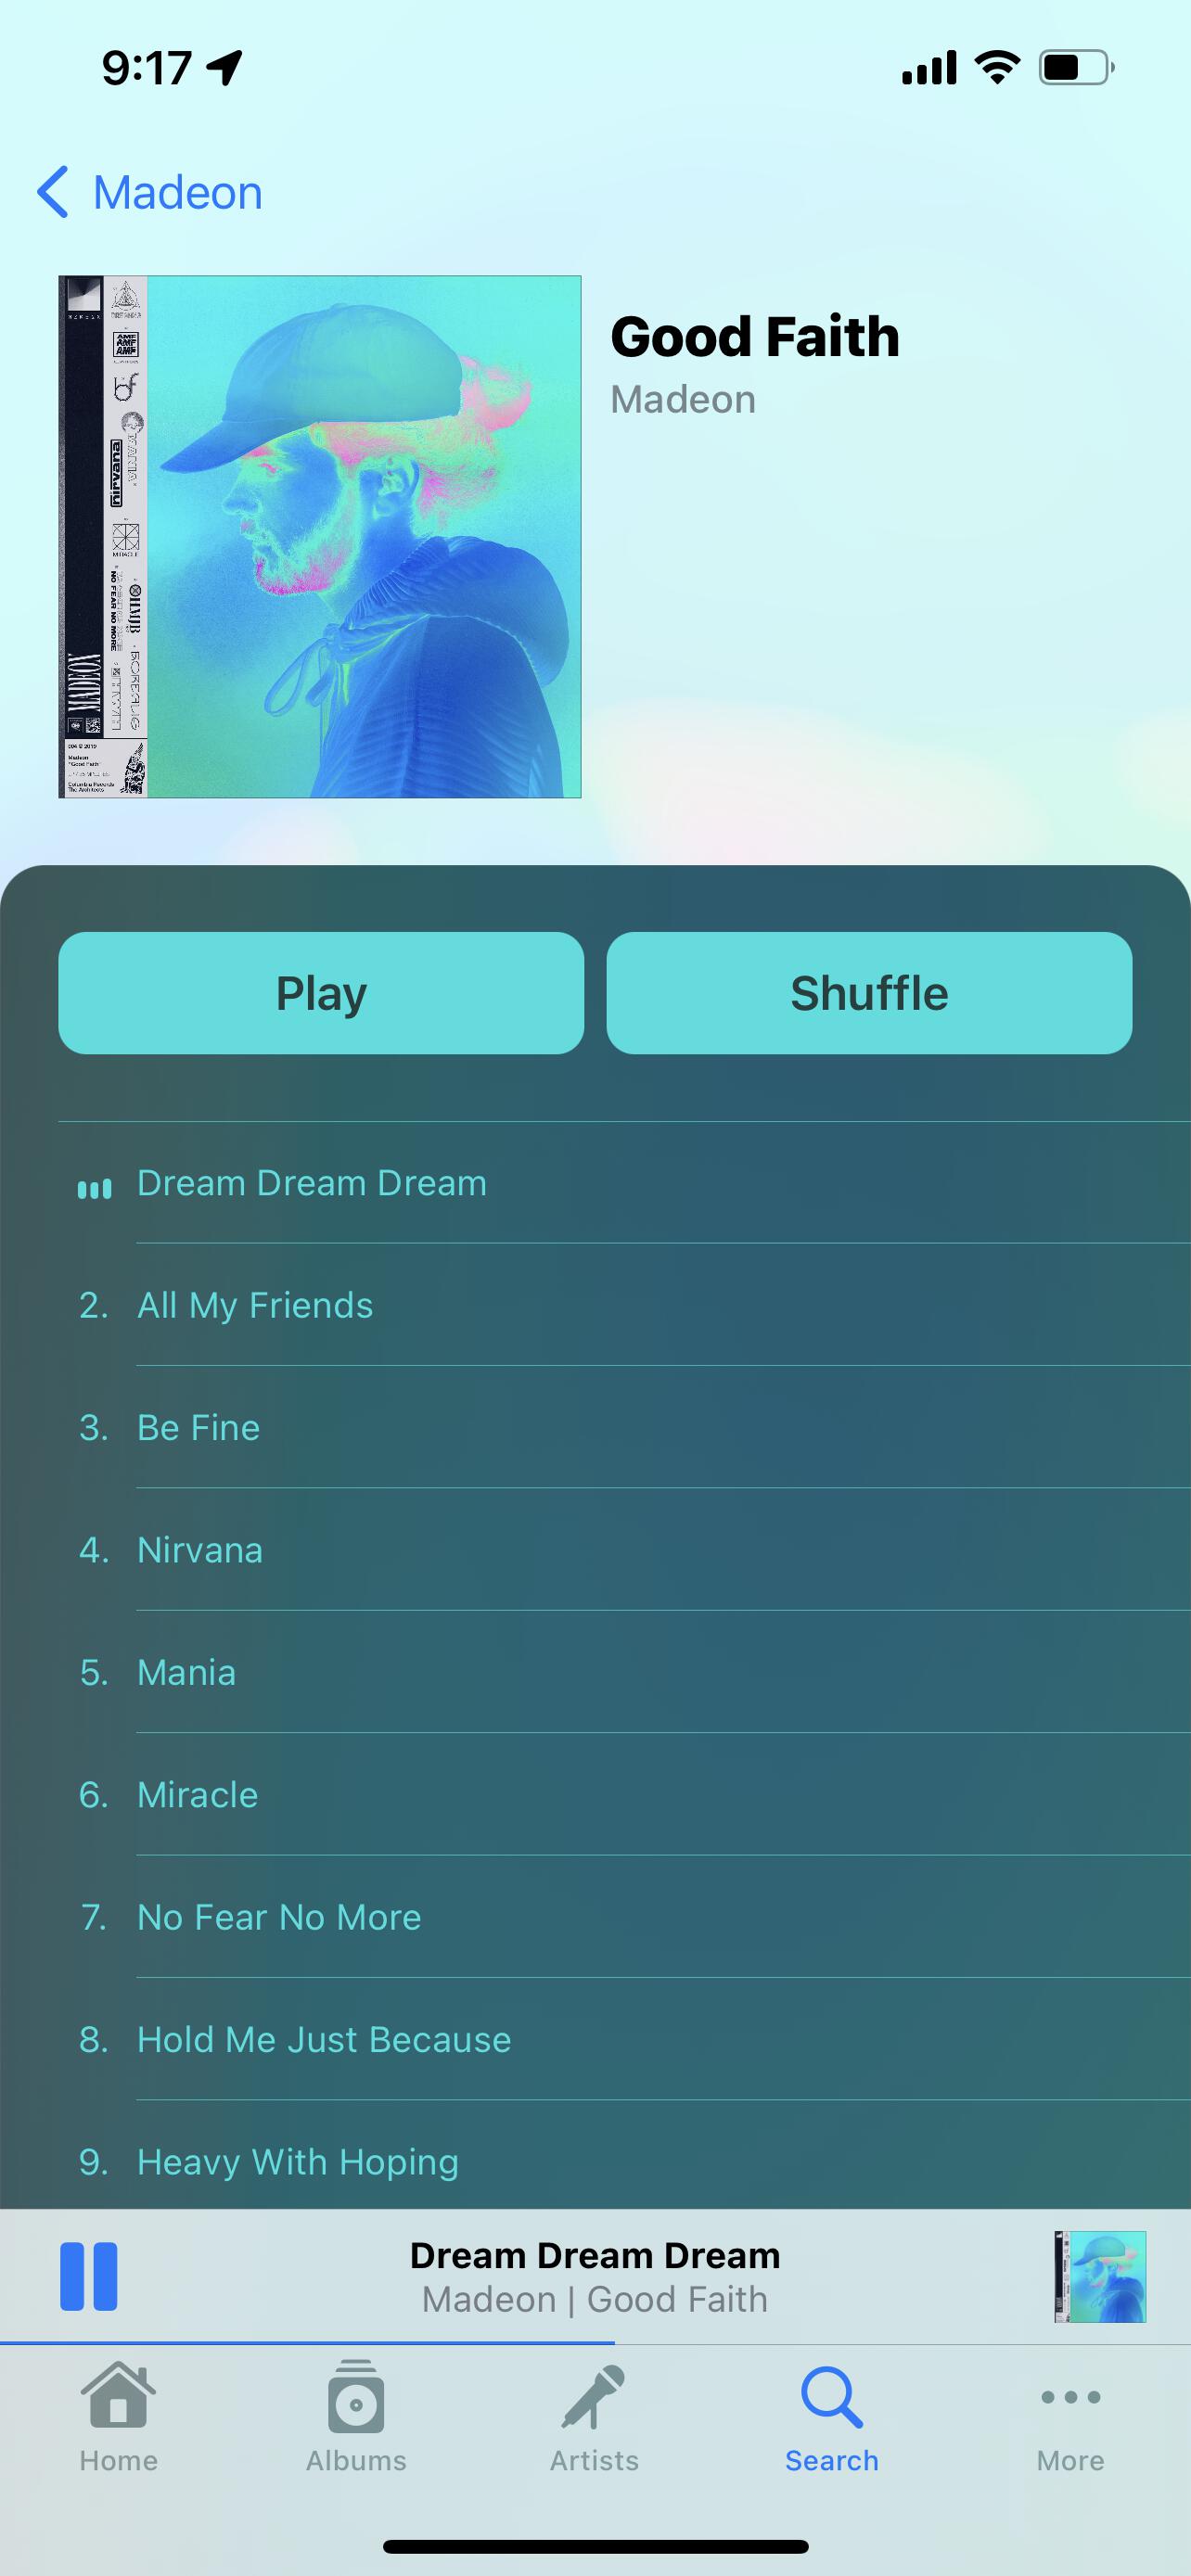 Image of the album view in light mode with a predominantly blue record